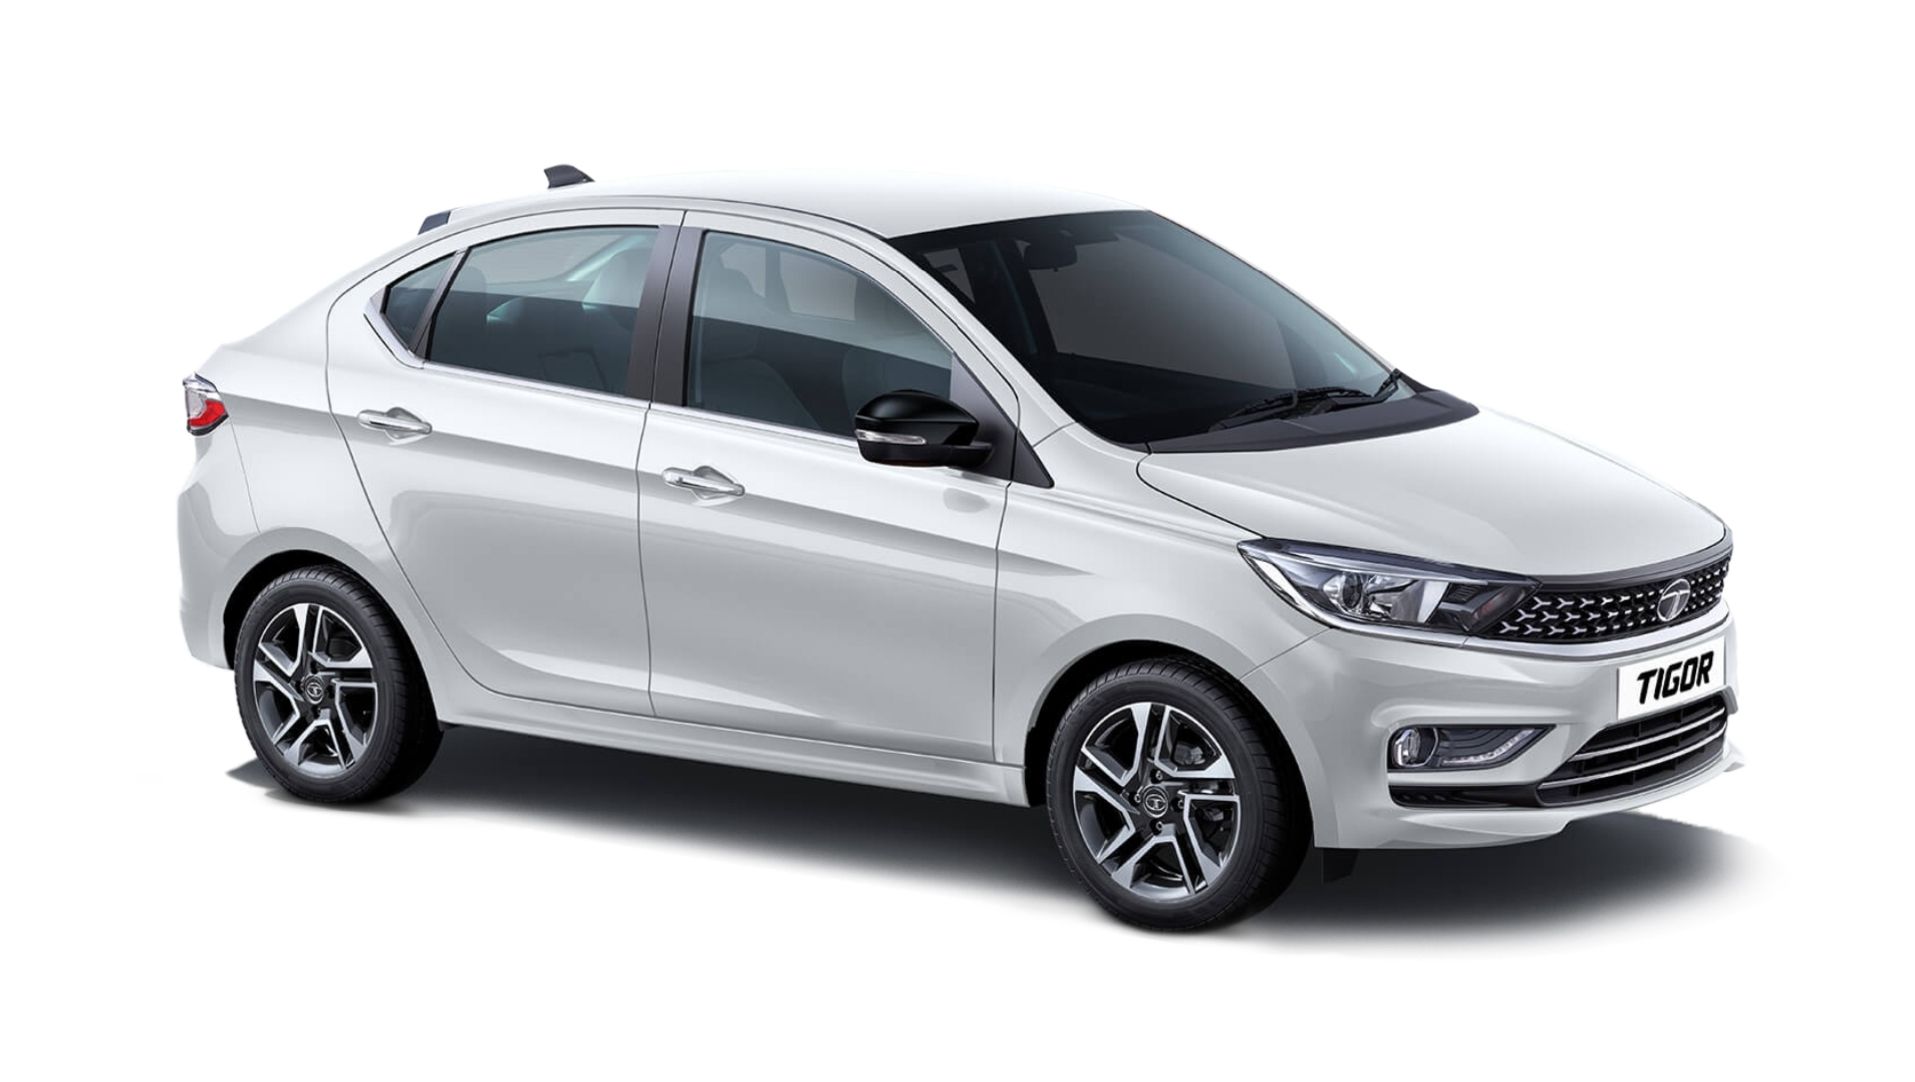 Facelifted Tata Tigor EV Launched In India At Rs 11.99 Lakh - ZigWheels